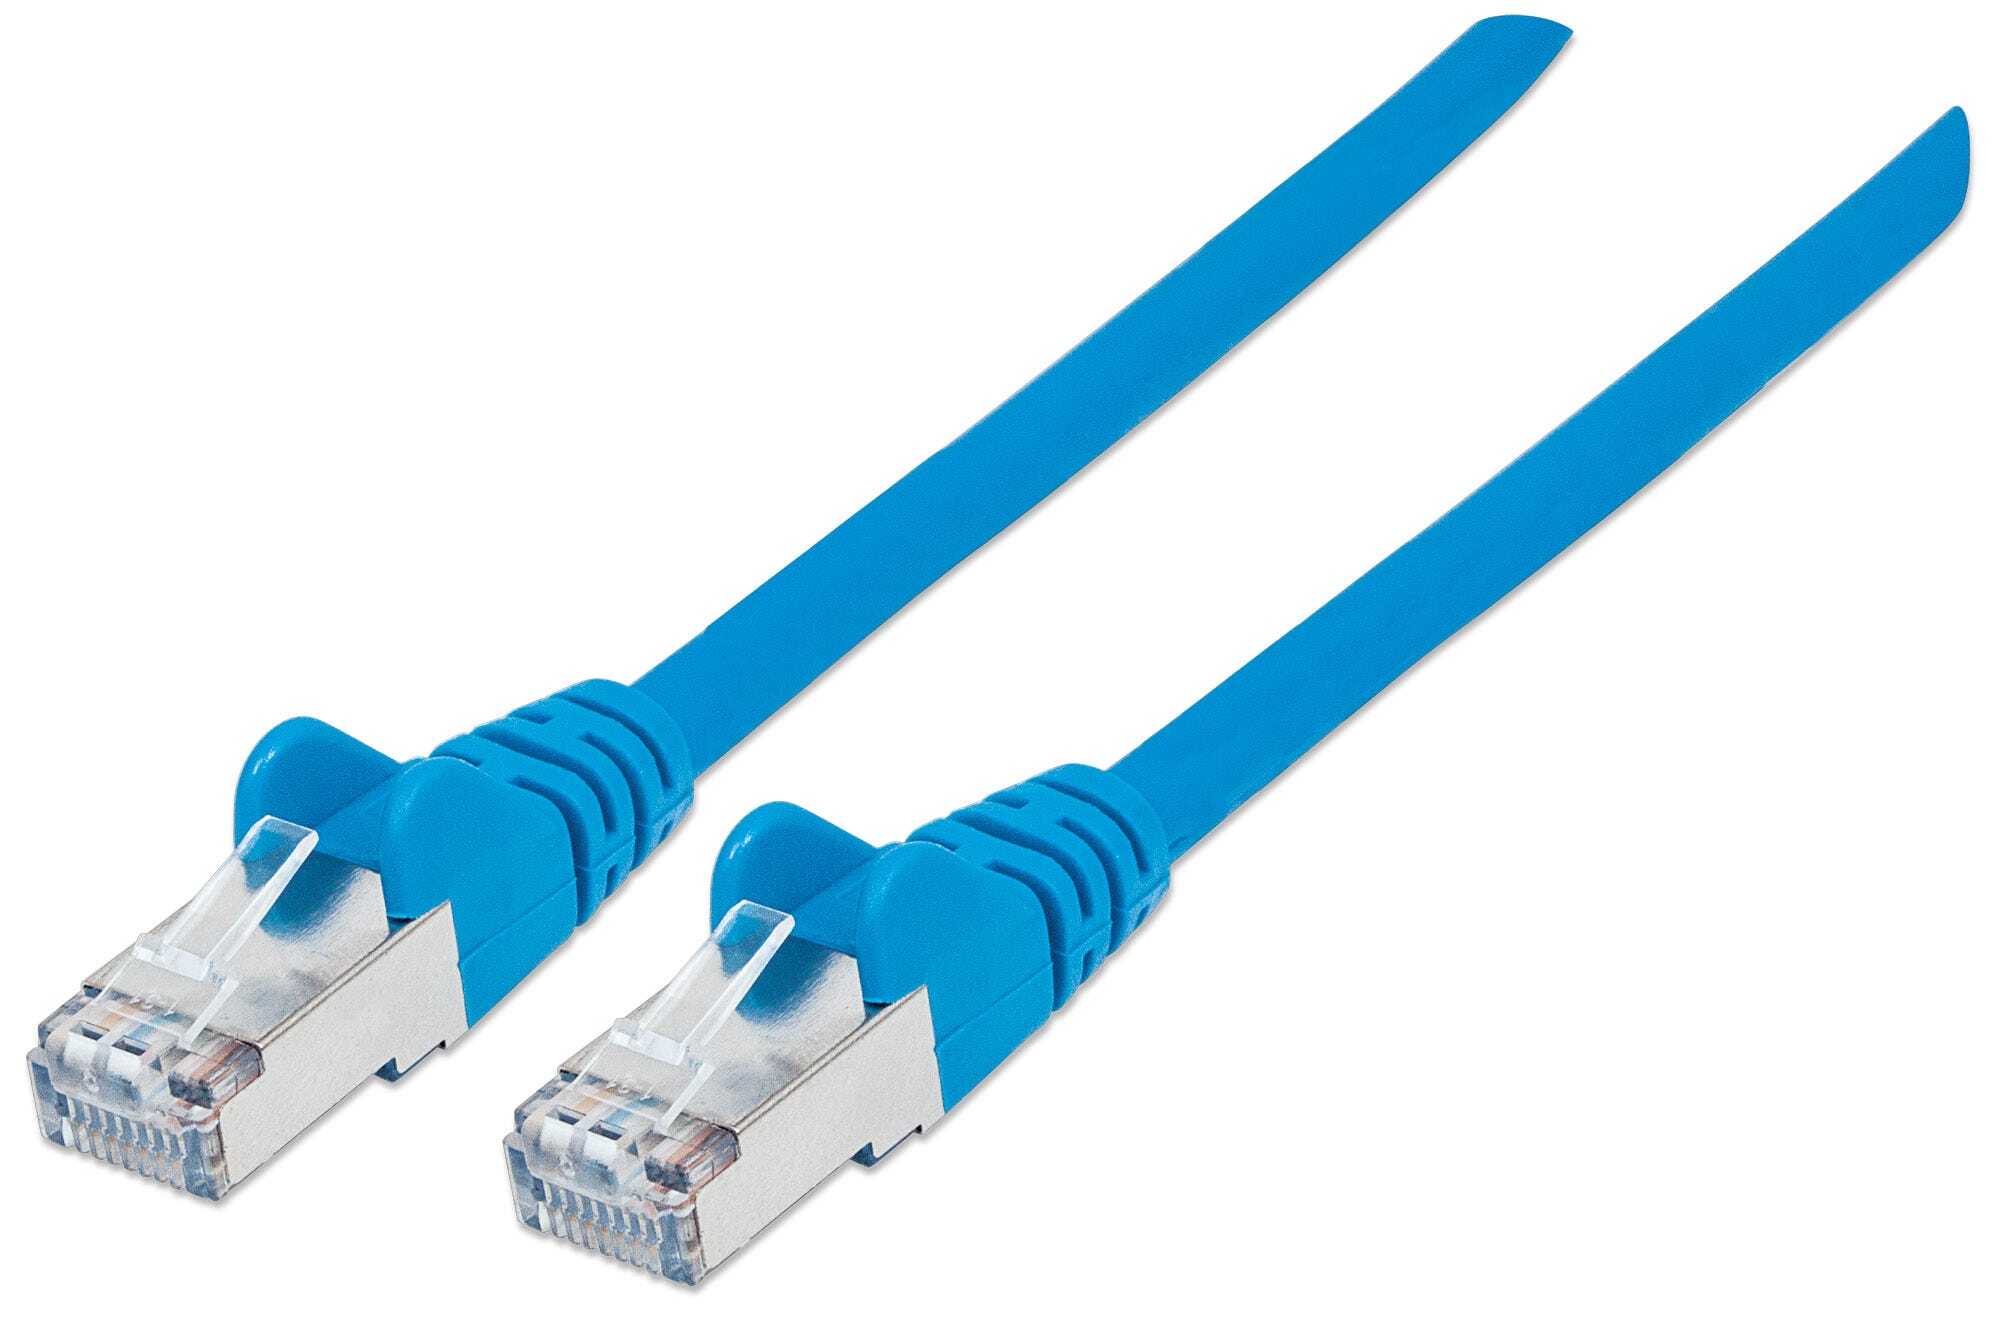 Intellinet Network Patch Cable, Cat7 Cable/Cat6A Plugs, 0.25m, Blue, Copper, S/FTP, LSOH / LSZH, PVC, Gold Plated Contacts, Snagless, Booted, Polybag